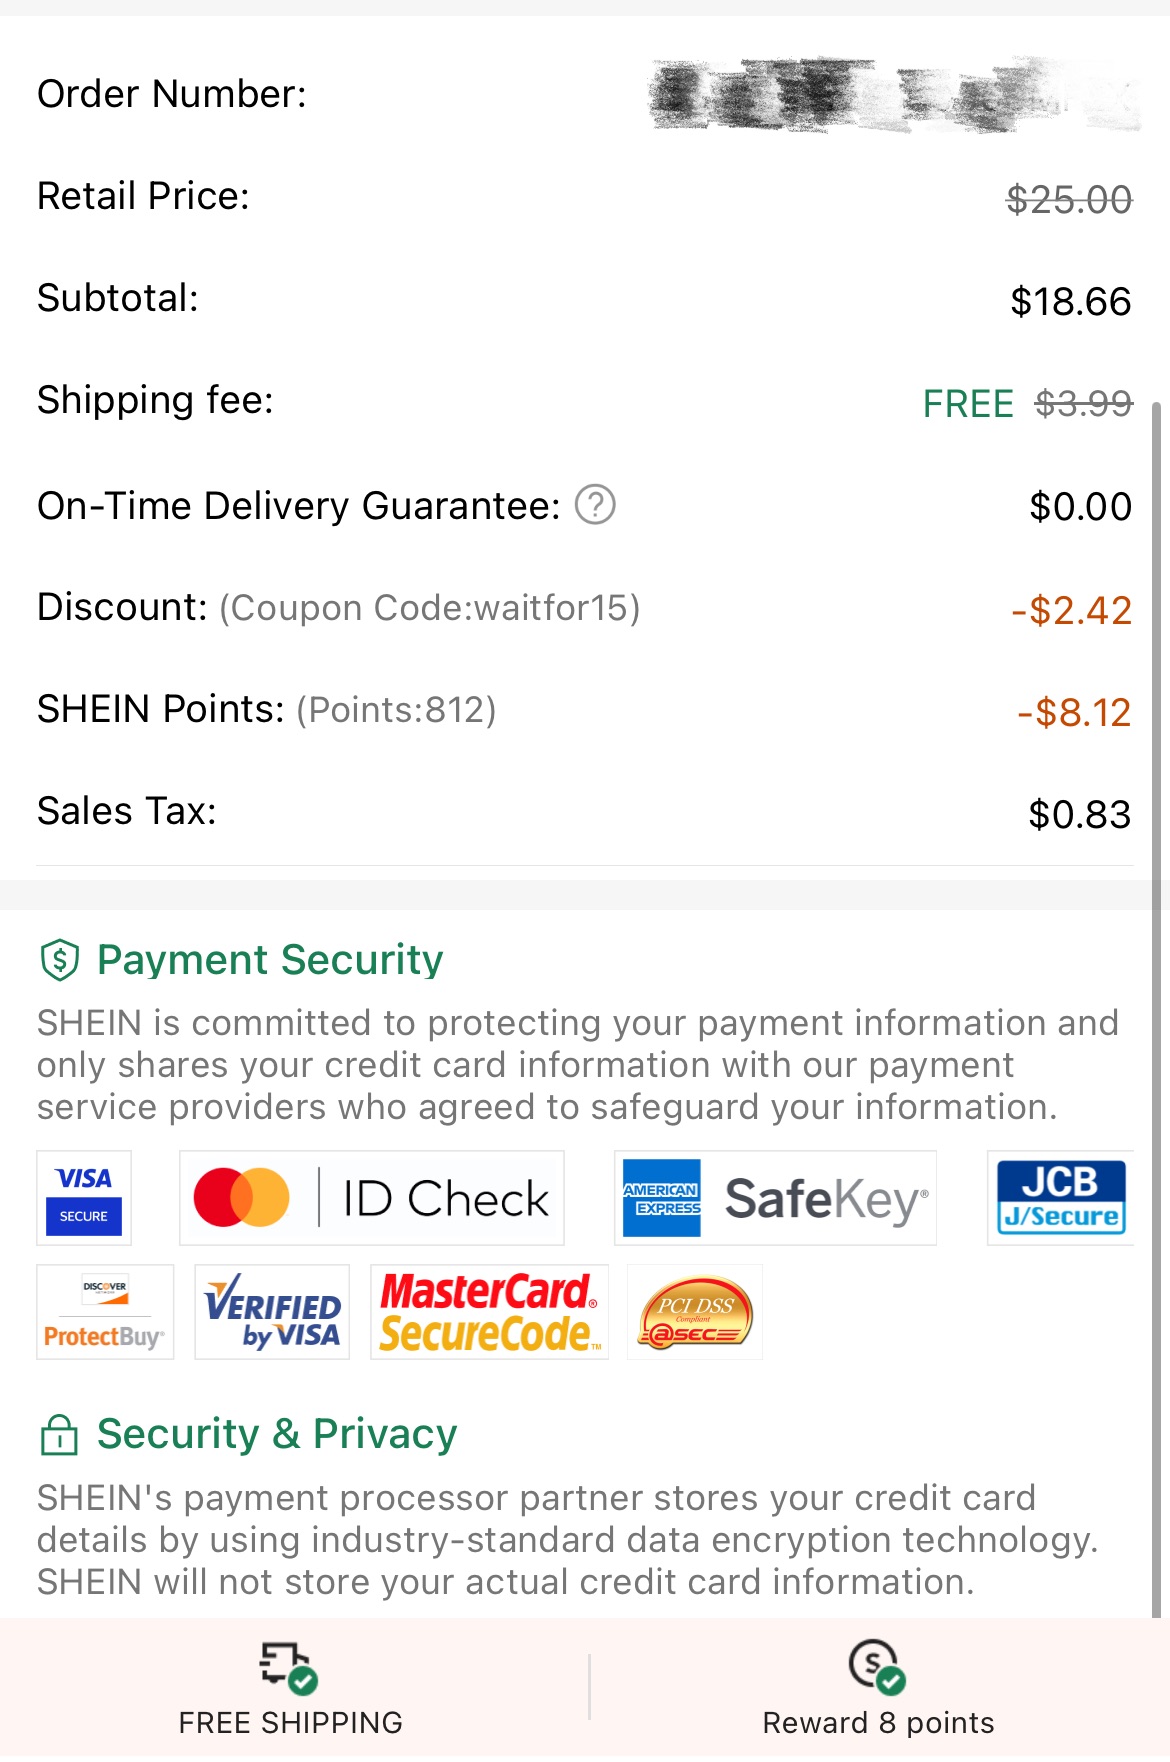 Free shipping, % Off plus SHEIN points